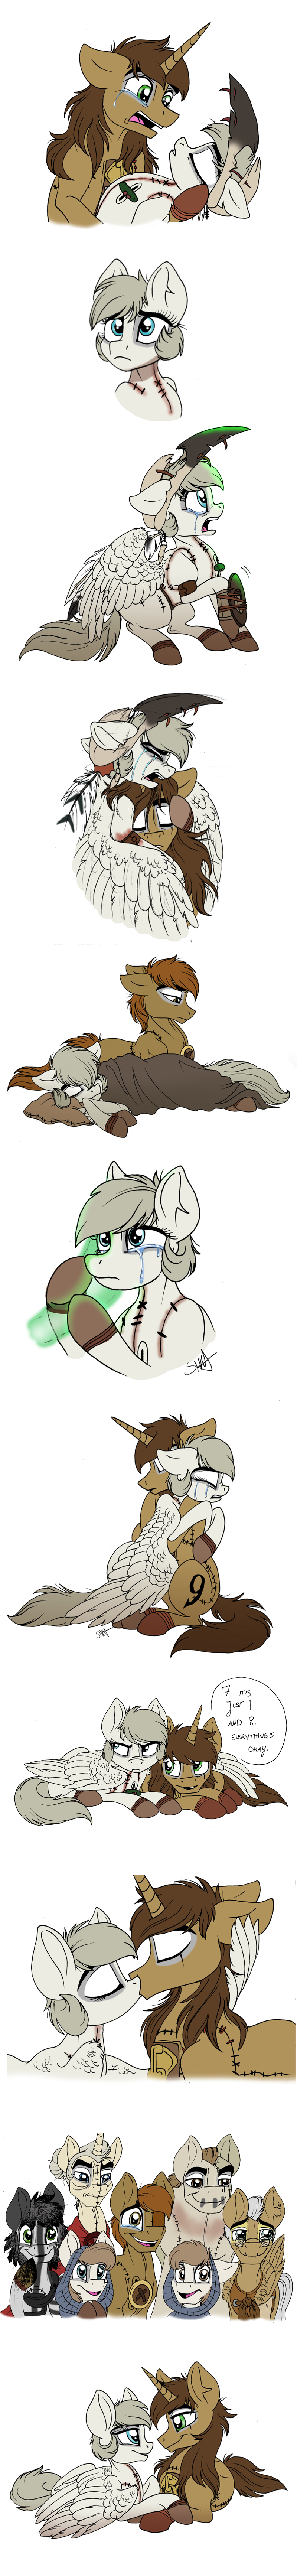 Yet Another Stitchpony Sketchdump by Celestial-Rainstorm on DeviantArt